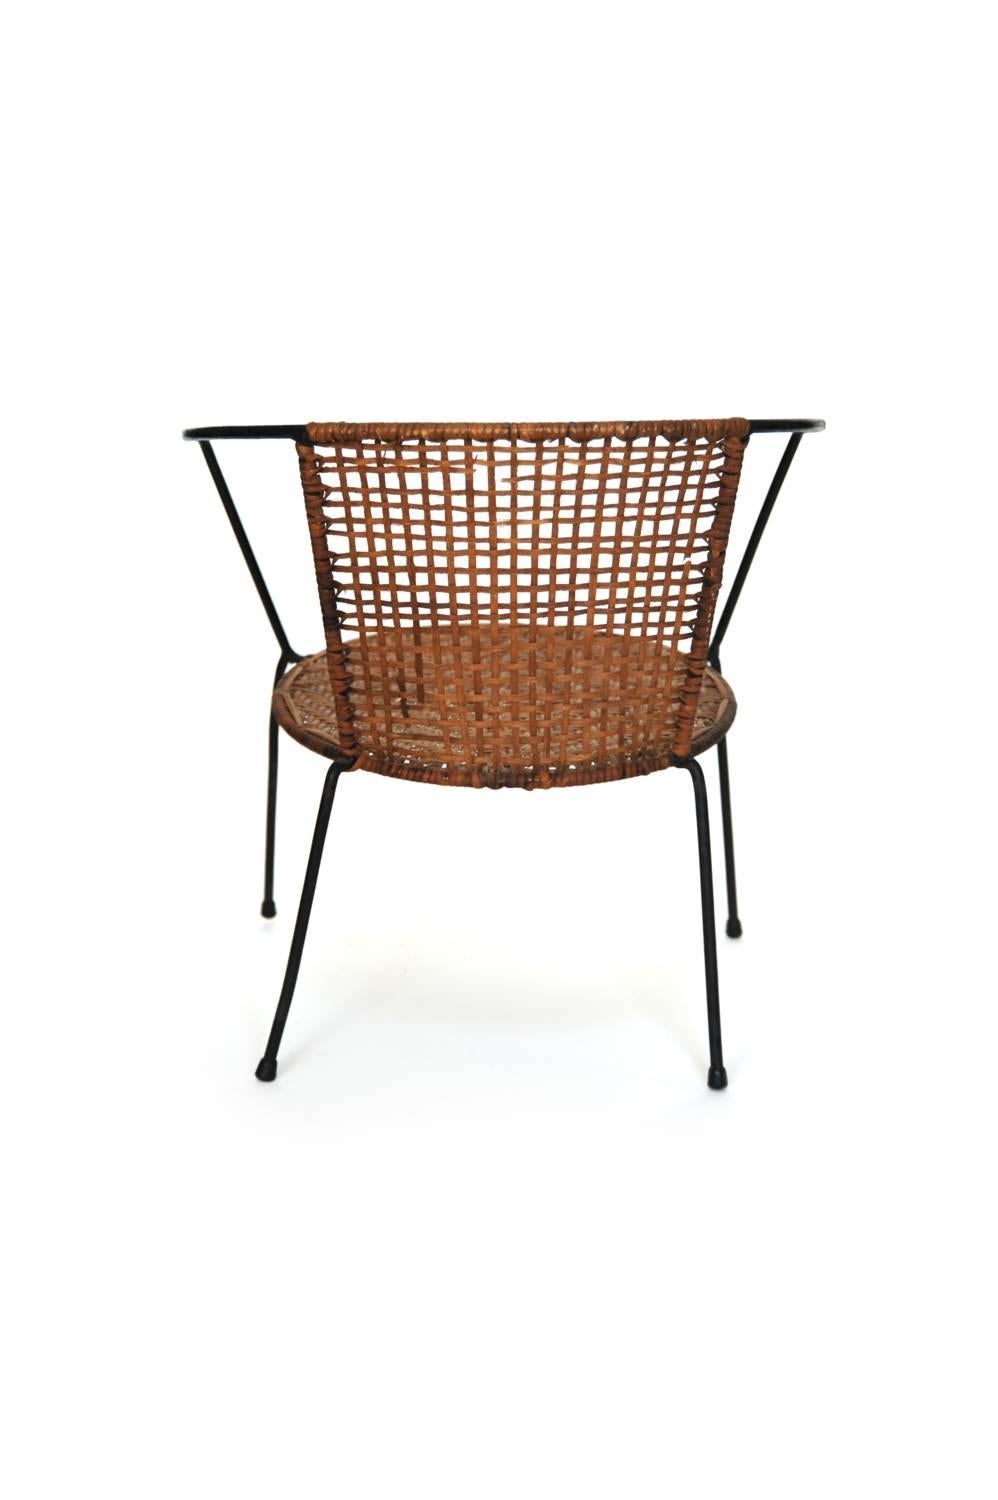 Mid-Century Modern Curved Geometric Rattan Child Chair with Iron Legs, USA, 1950s For Sale